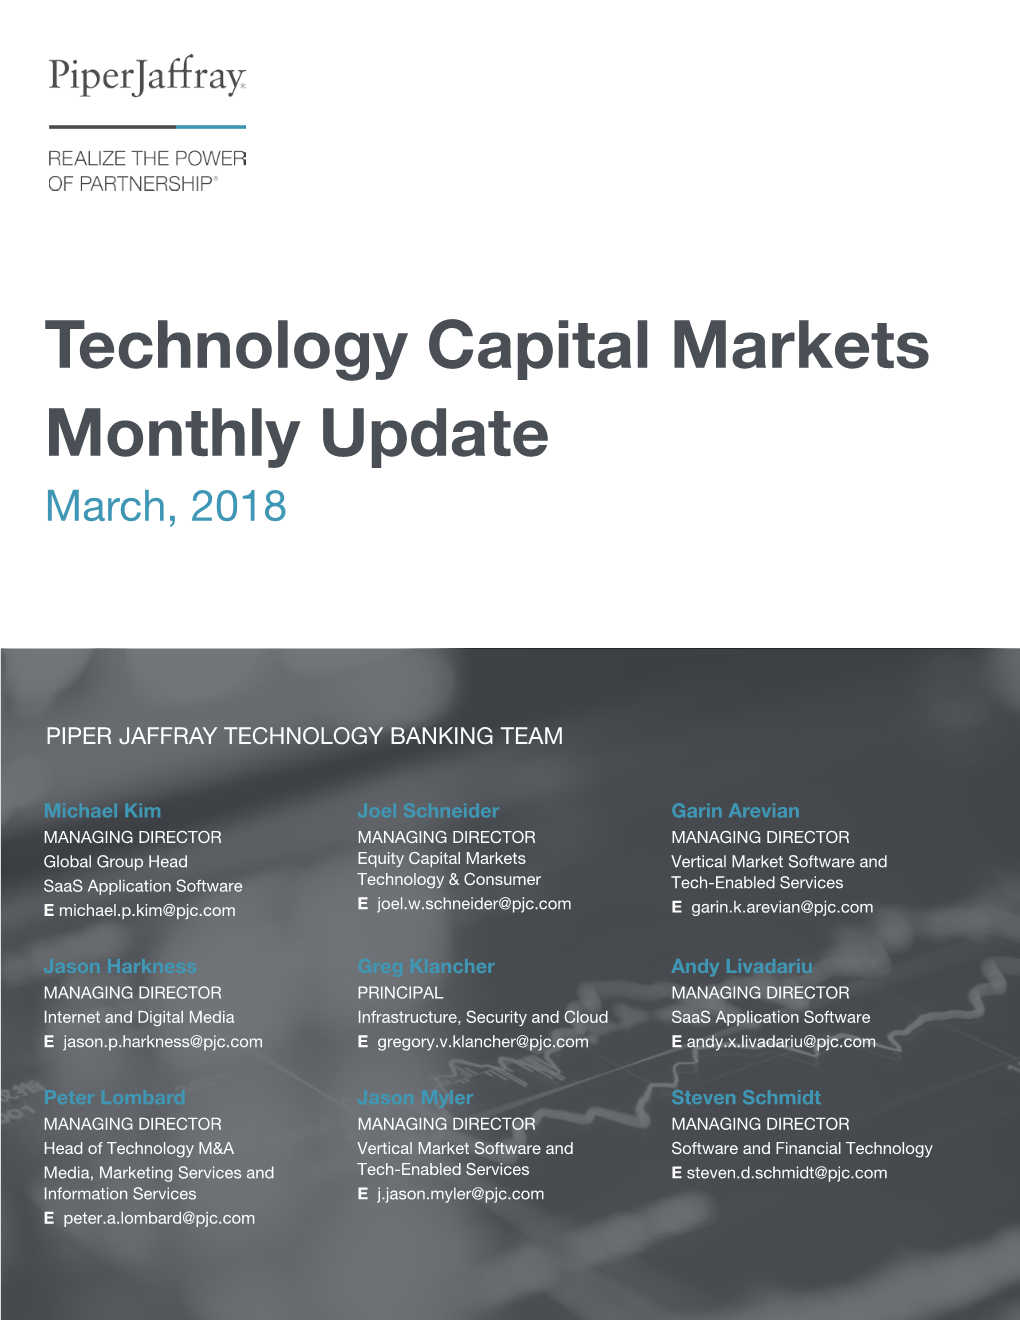 Technology Capital Markets Monthly Update March, 2018